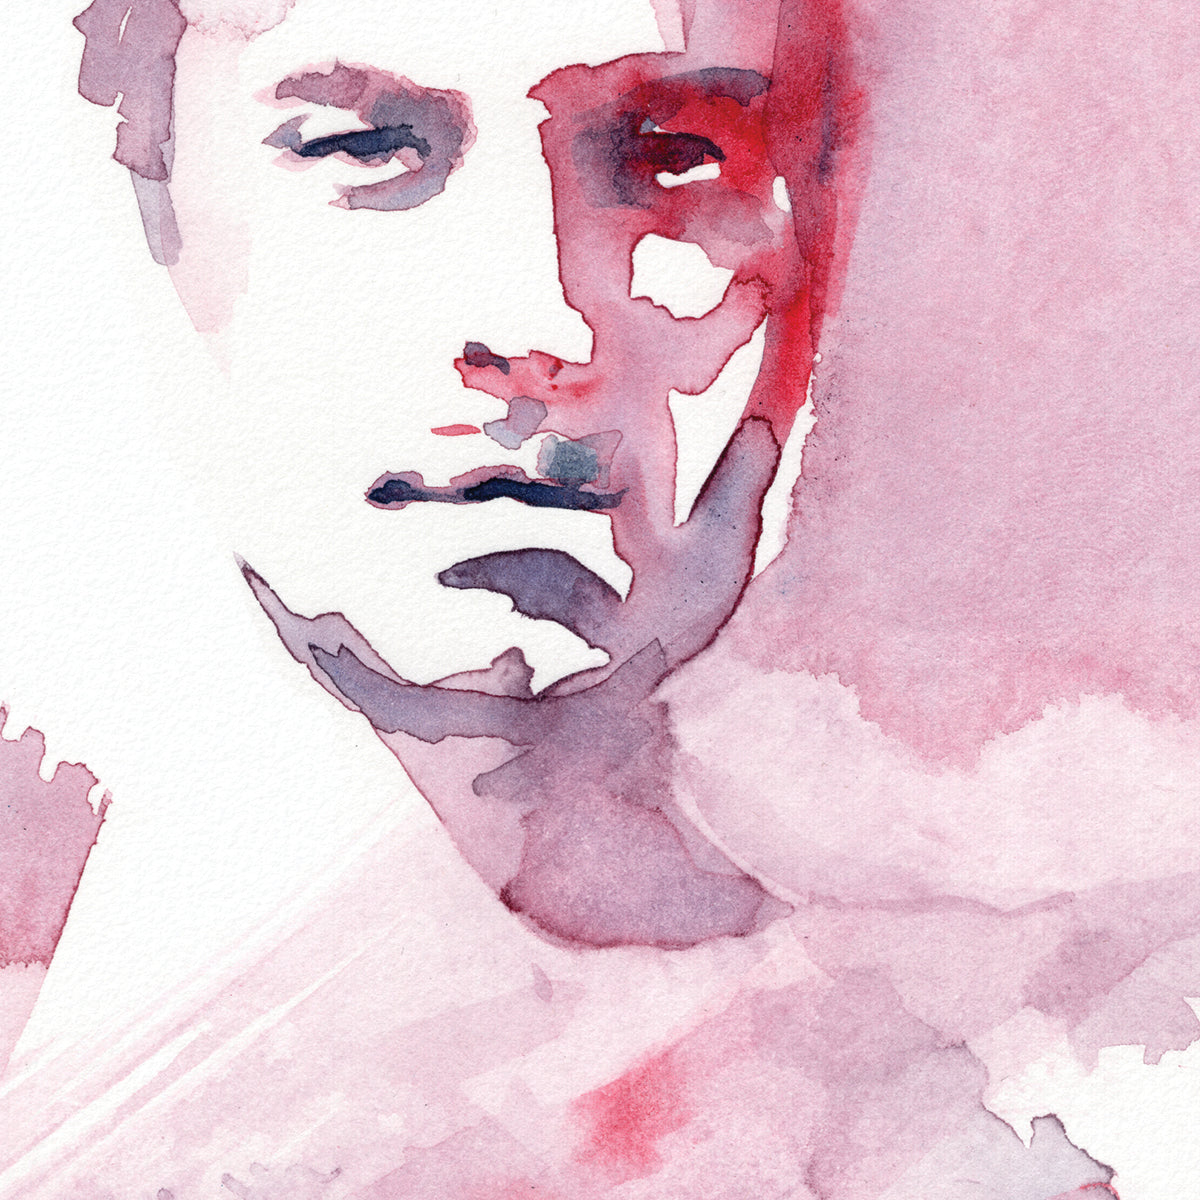 Shirtless Male Model with Dapper Eyes - Original Watercolor Painting